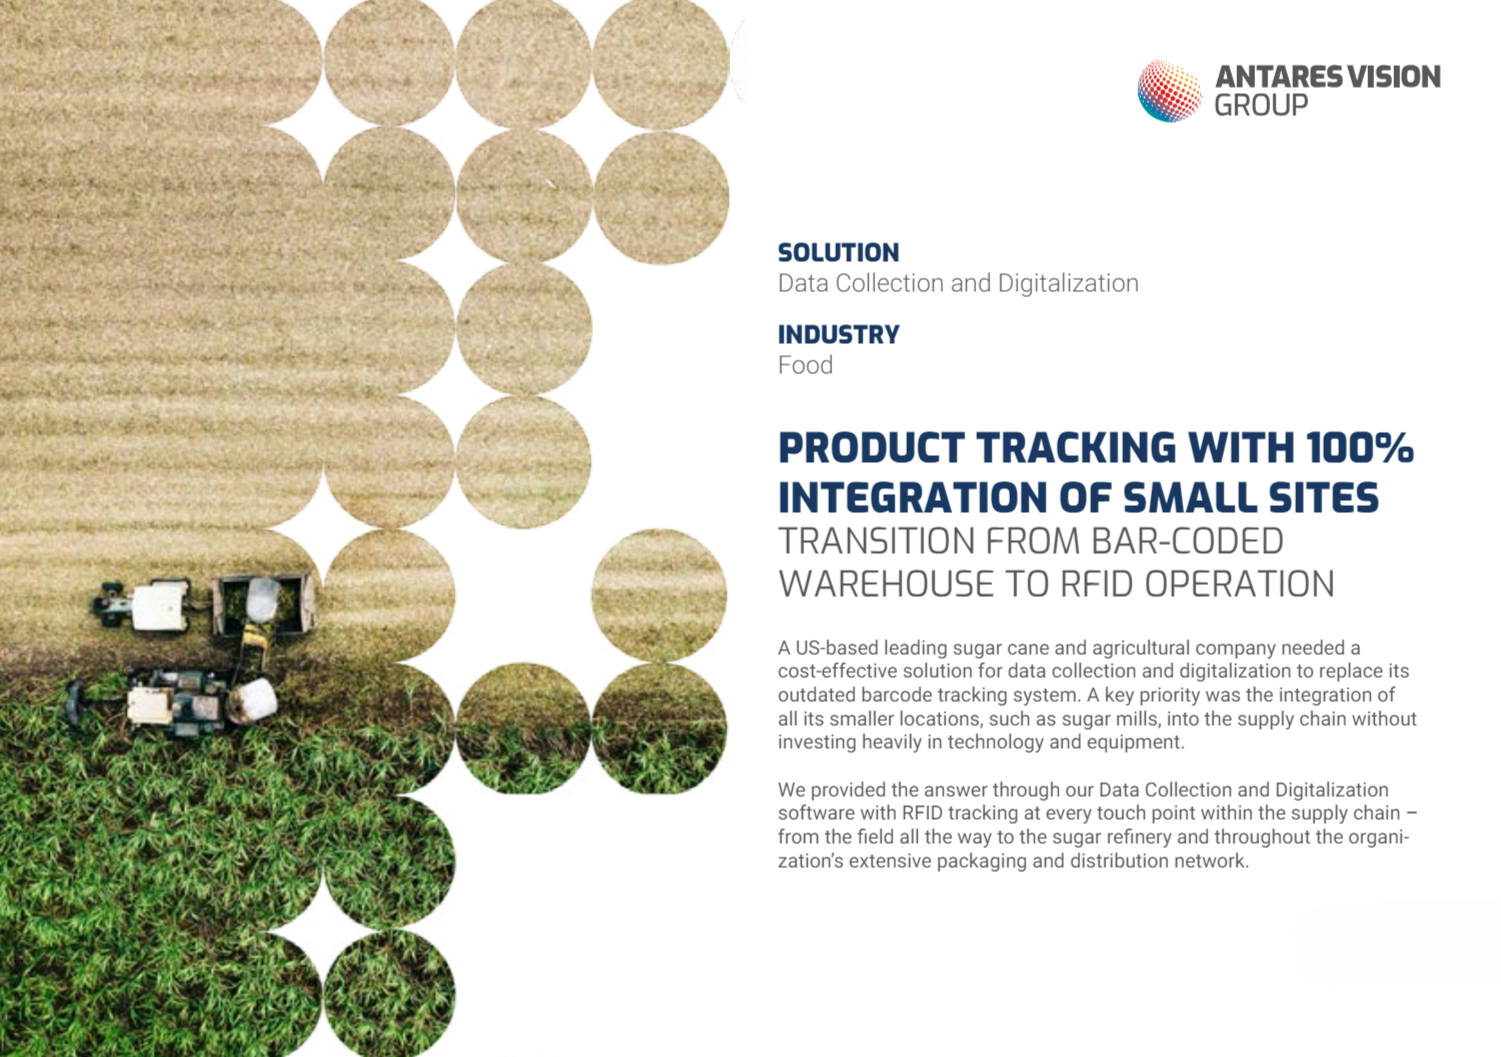 Product tracking with 100% integration of small sites